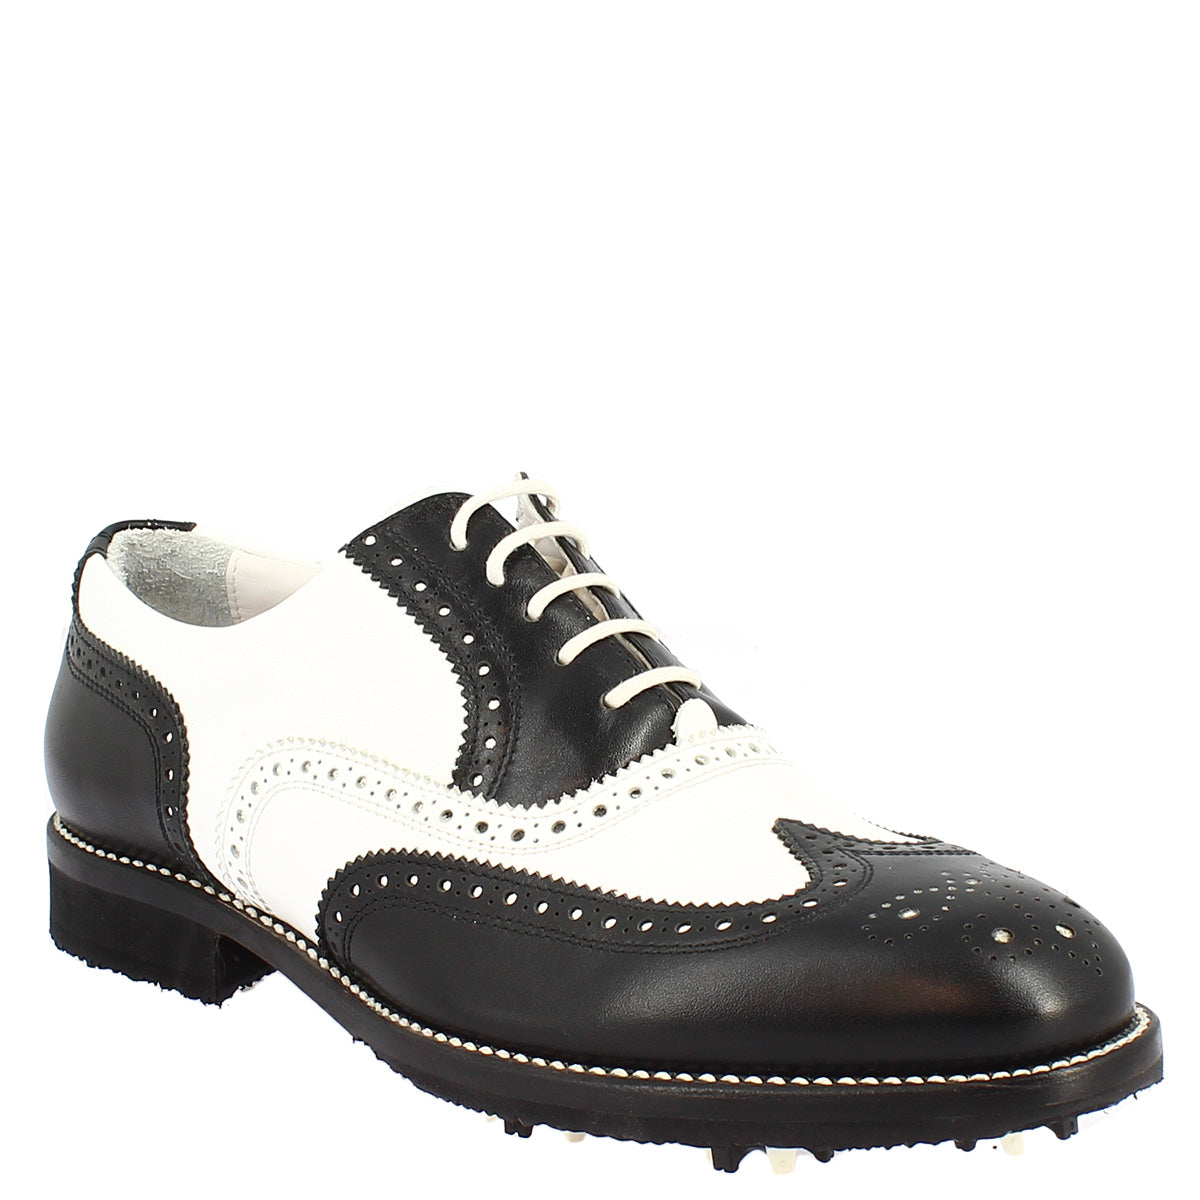 Handmade two-tone black and white women's golf shoes in leather